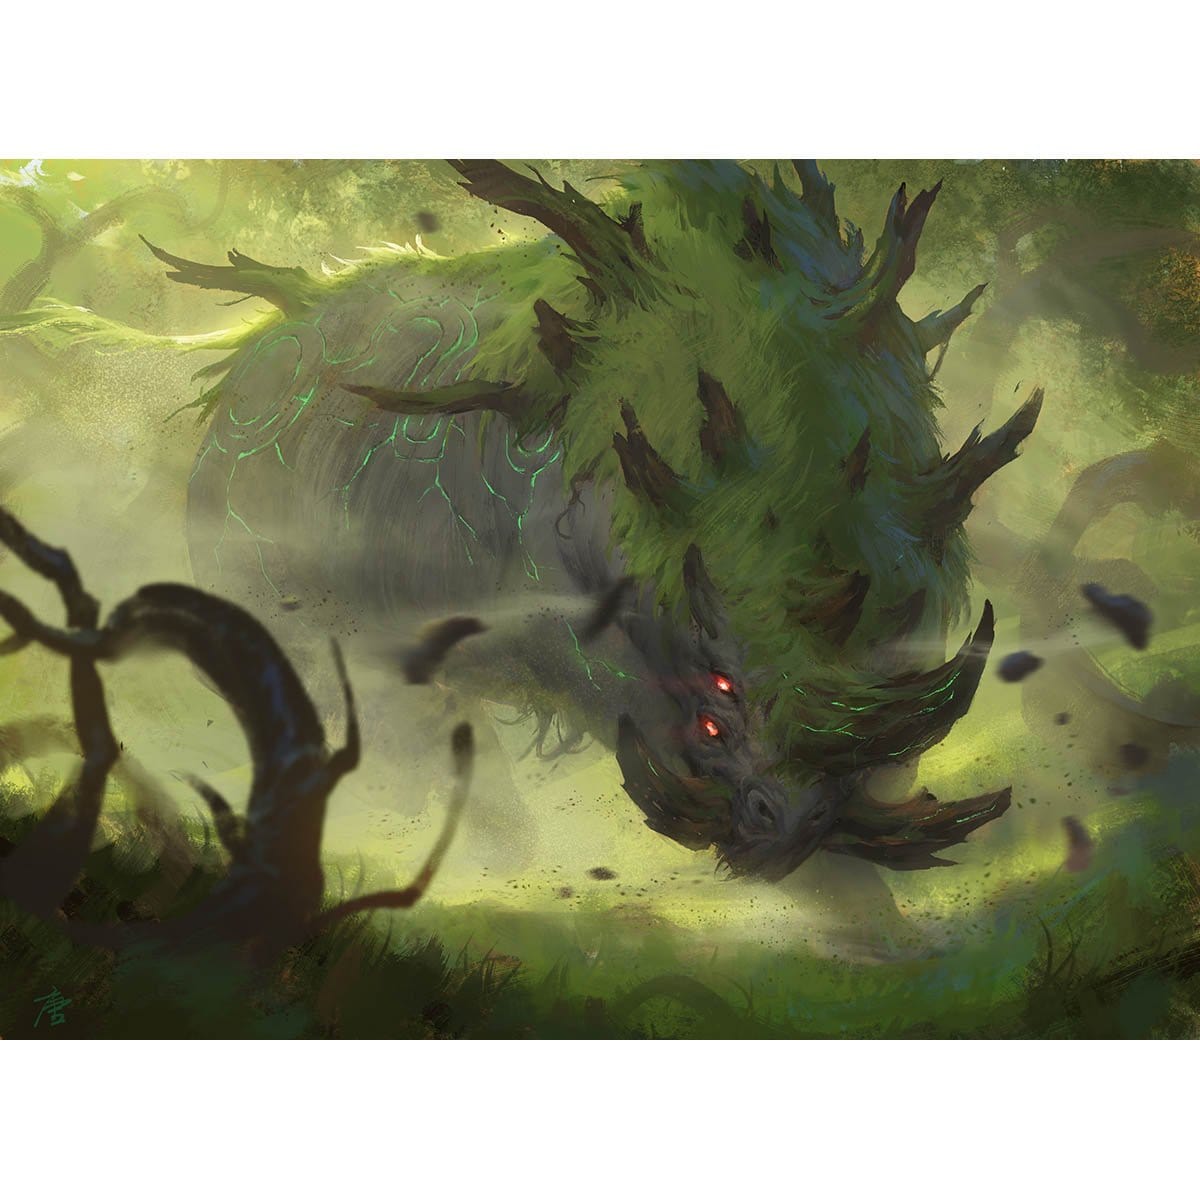 Gnarlback Rhino Print - Print - Original Magic Art - Accessories for Magic the Gathering and other card games